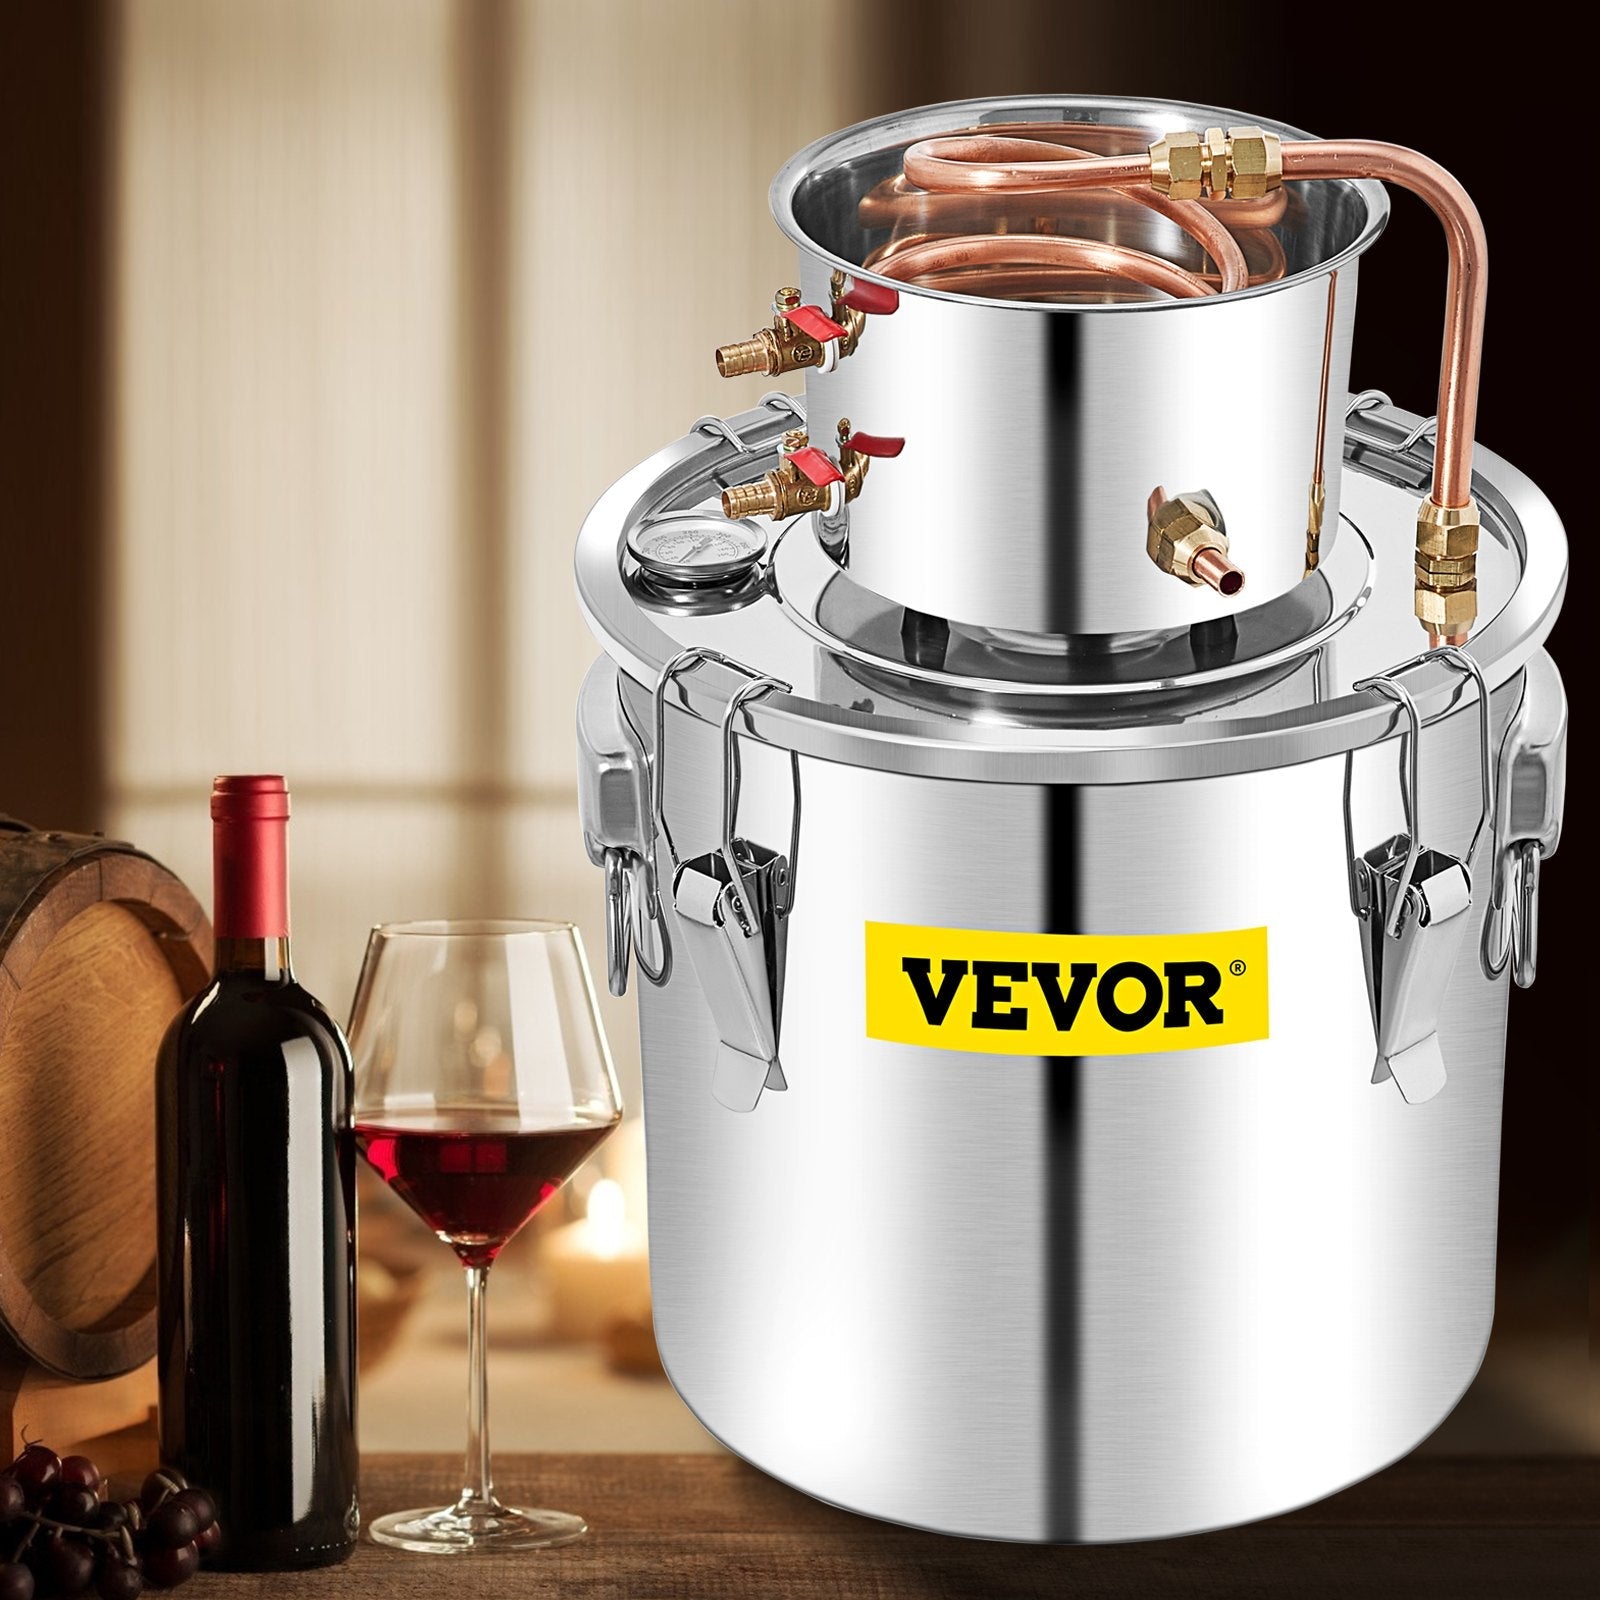 VEVOR Alcohol Still, 50L Distillery Kit w/Condenser & Pump, 13.2Gal Alcohol Still w/Copper Tube, Whiskey Distilling Kit w/Build-in Thermometer, Whiskey Making Kit for DIY Alcohol, Stainless Steel-6